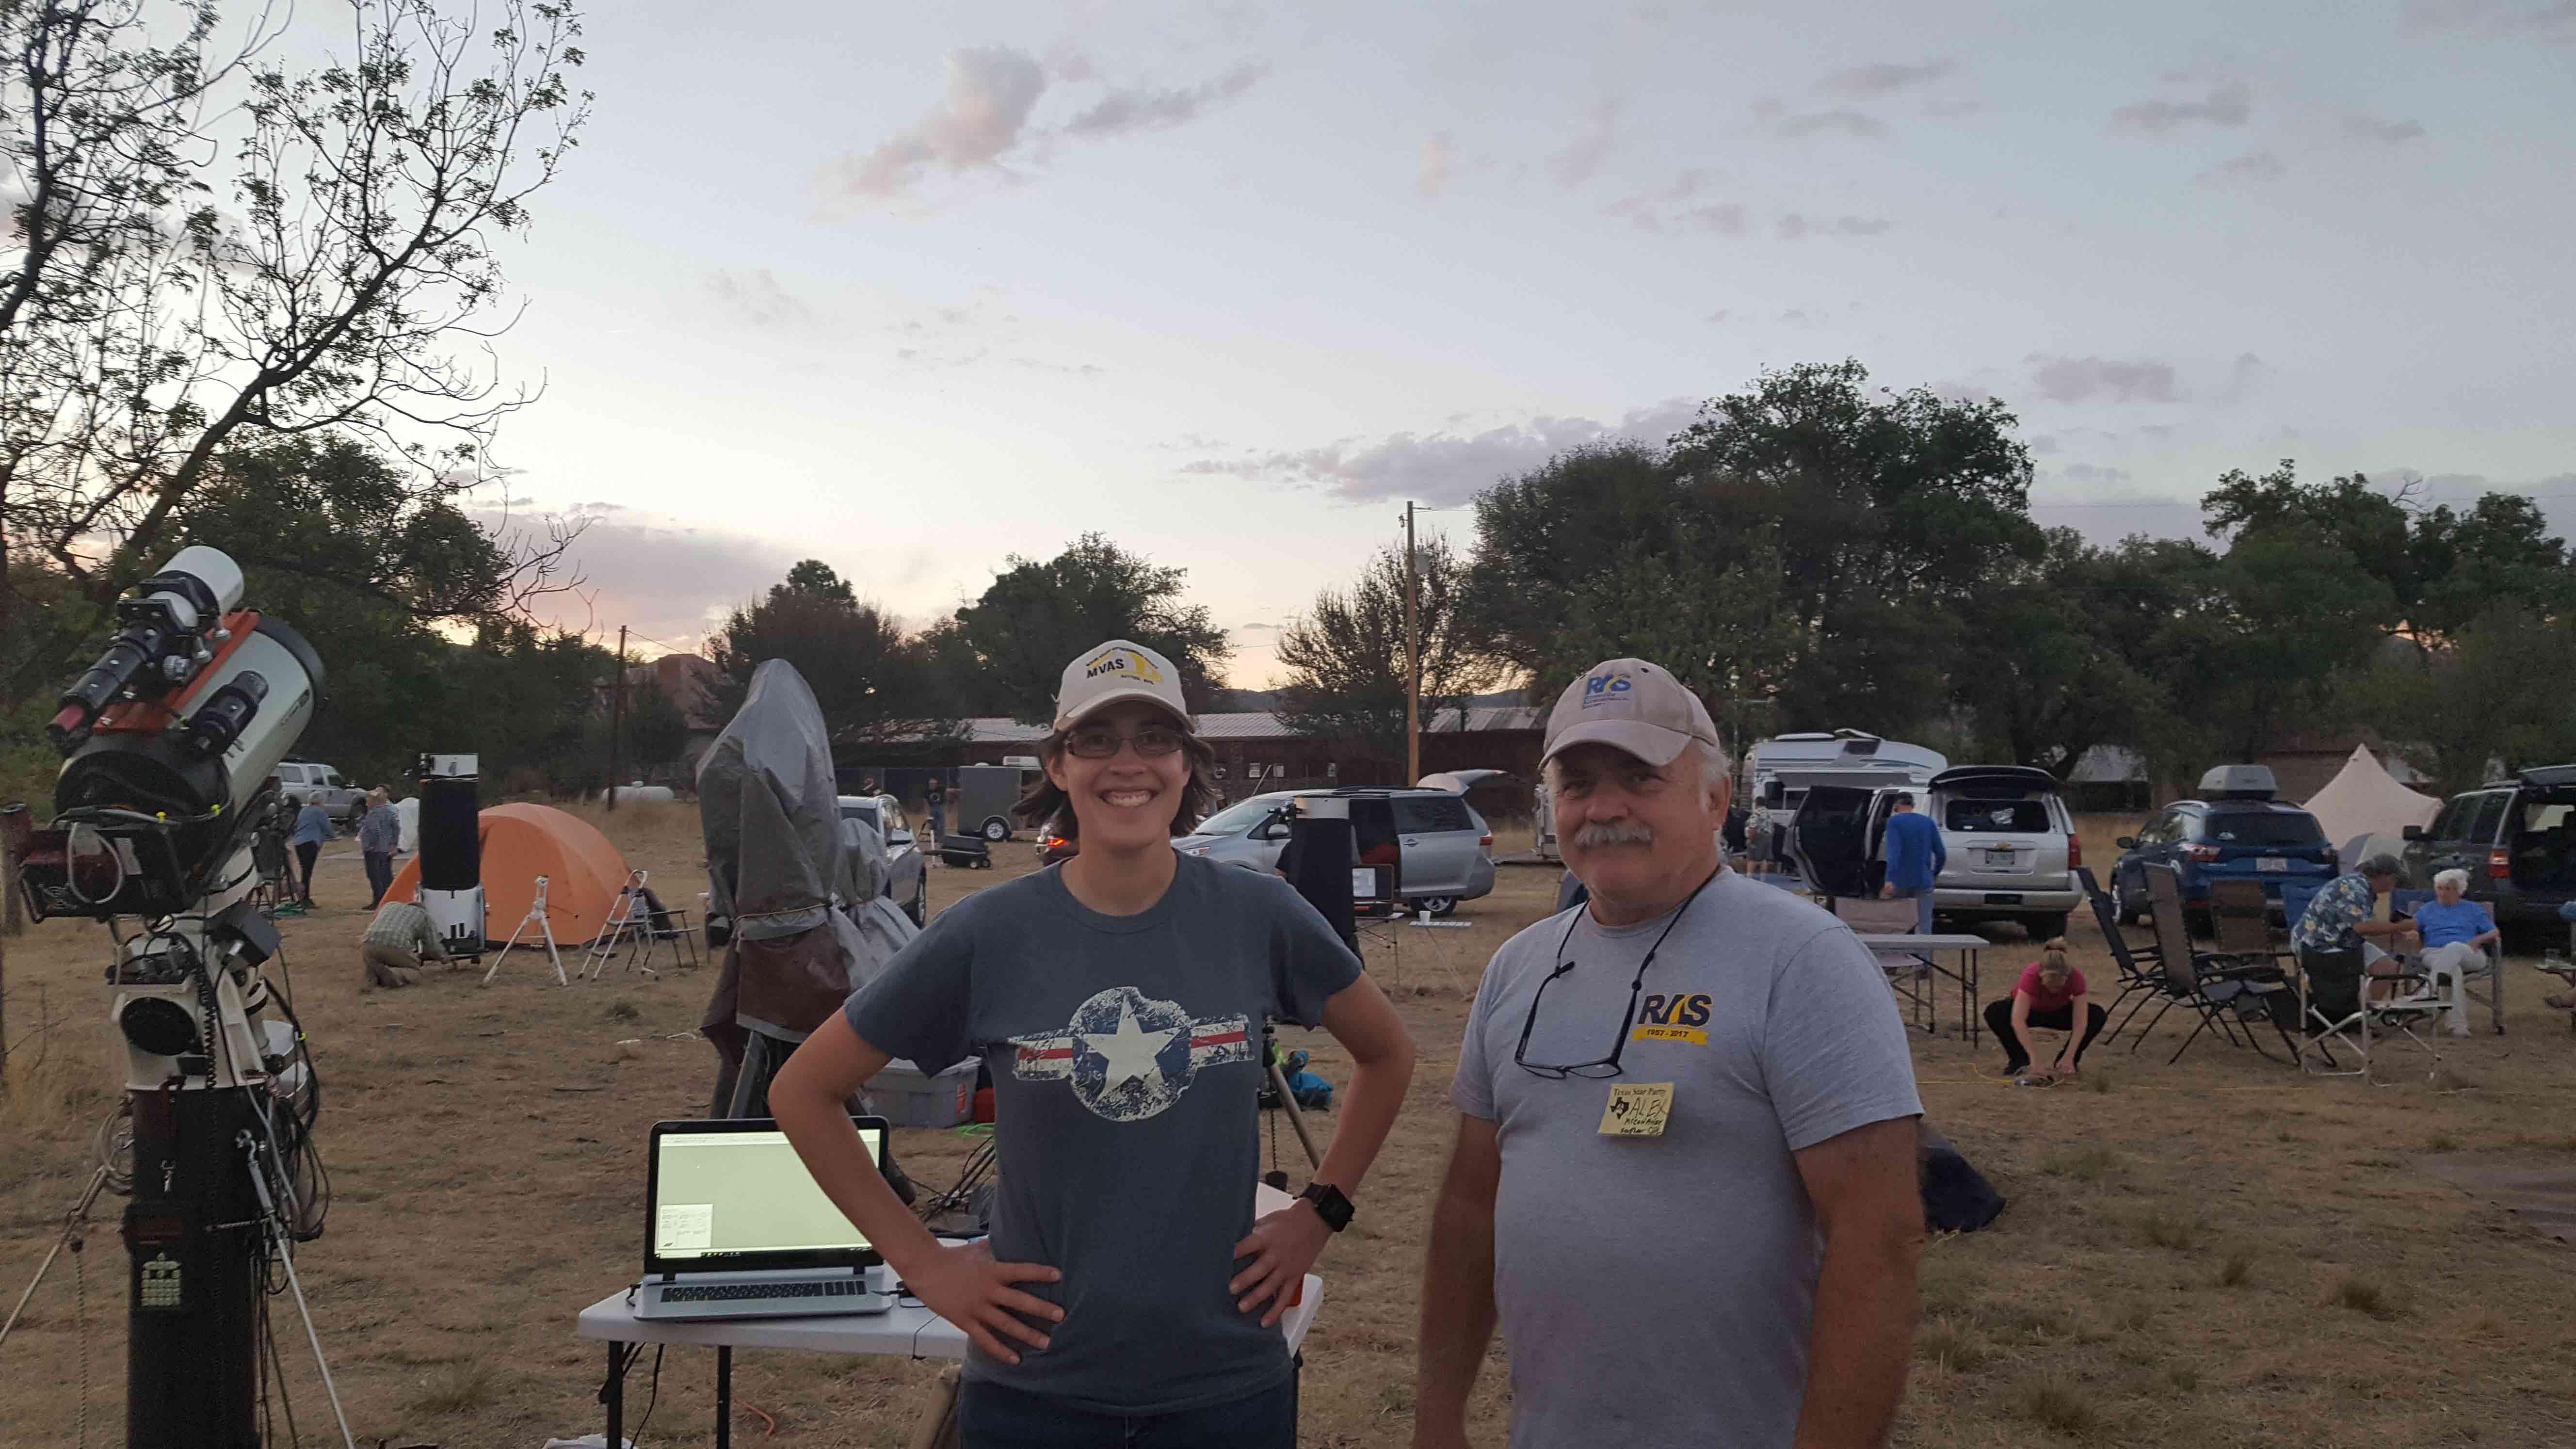 Texas Star Party (TSP) - May
      2018